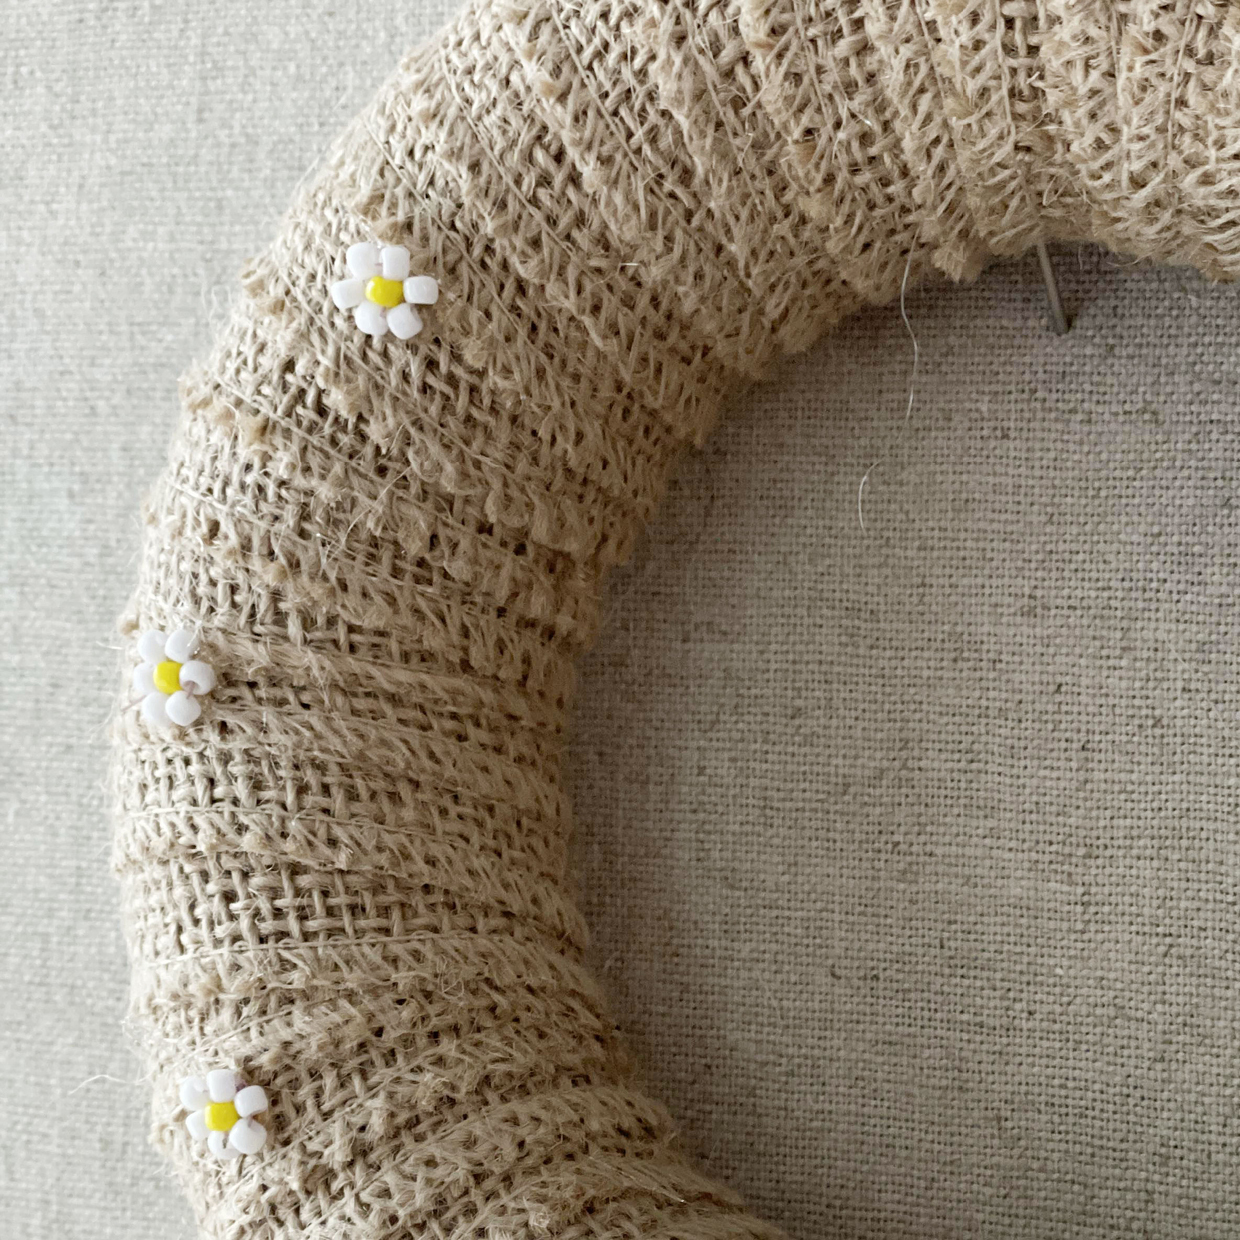 DIY this DIY: Jute-wrapped Easter wreath with marguerites project